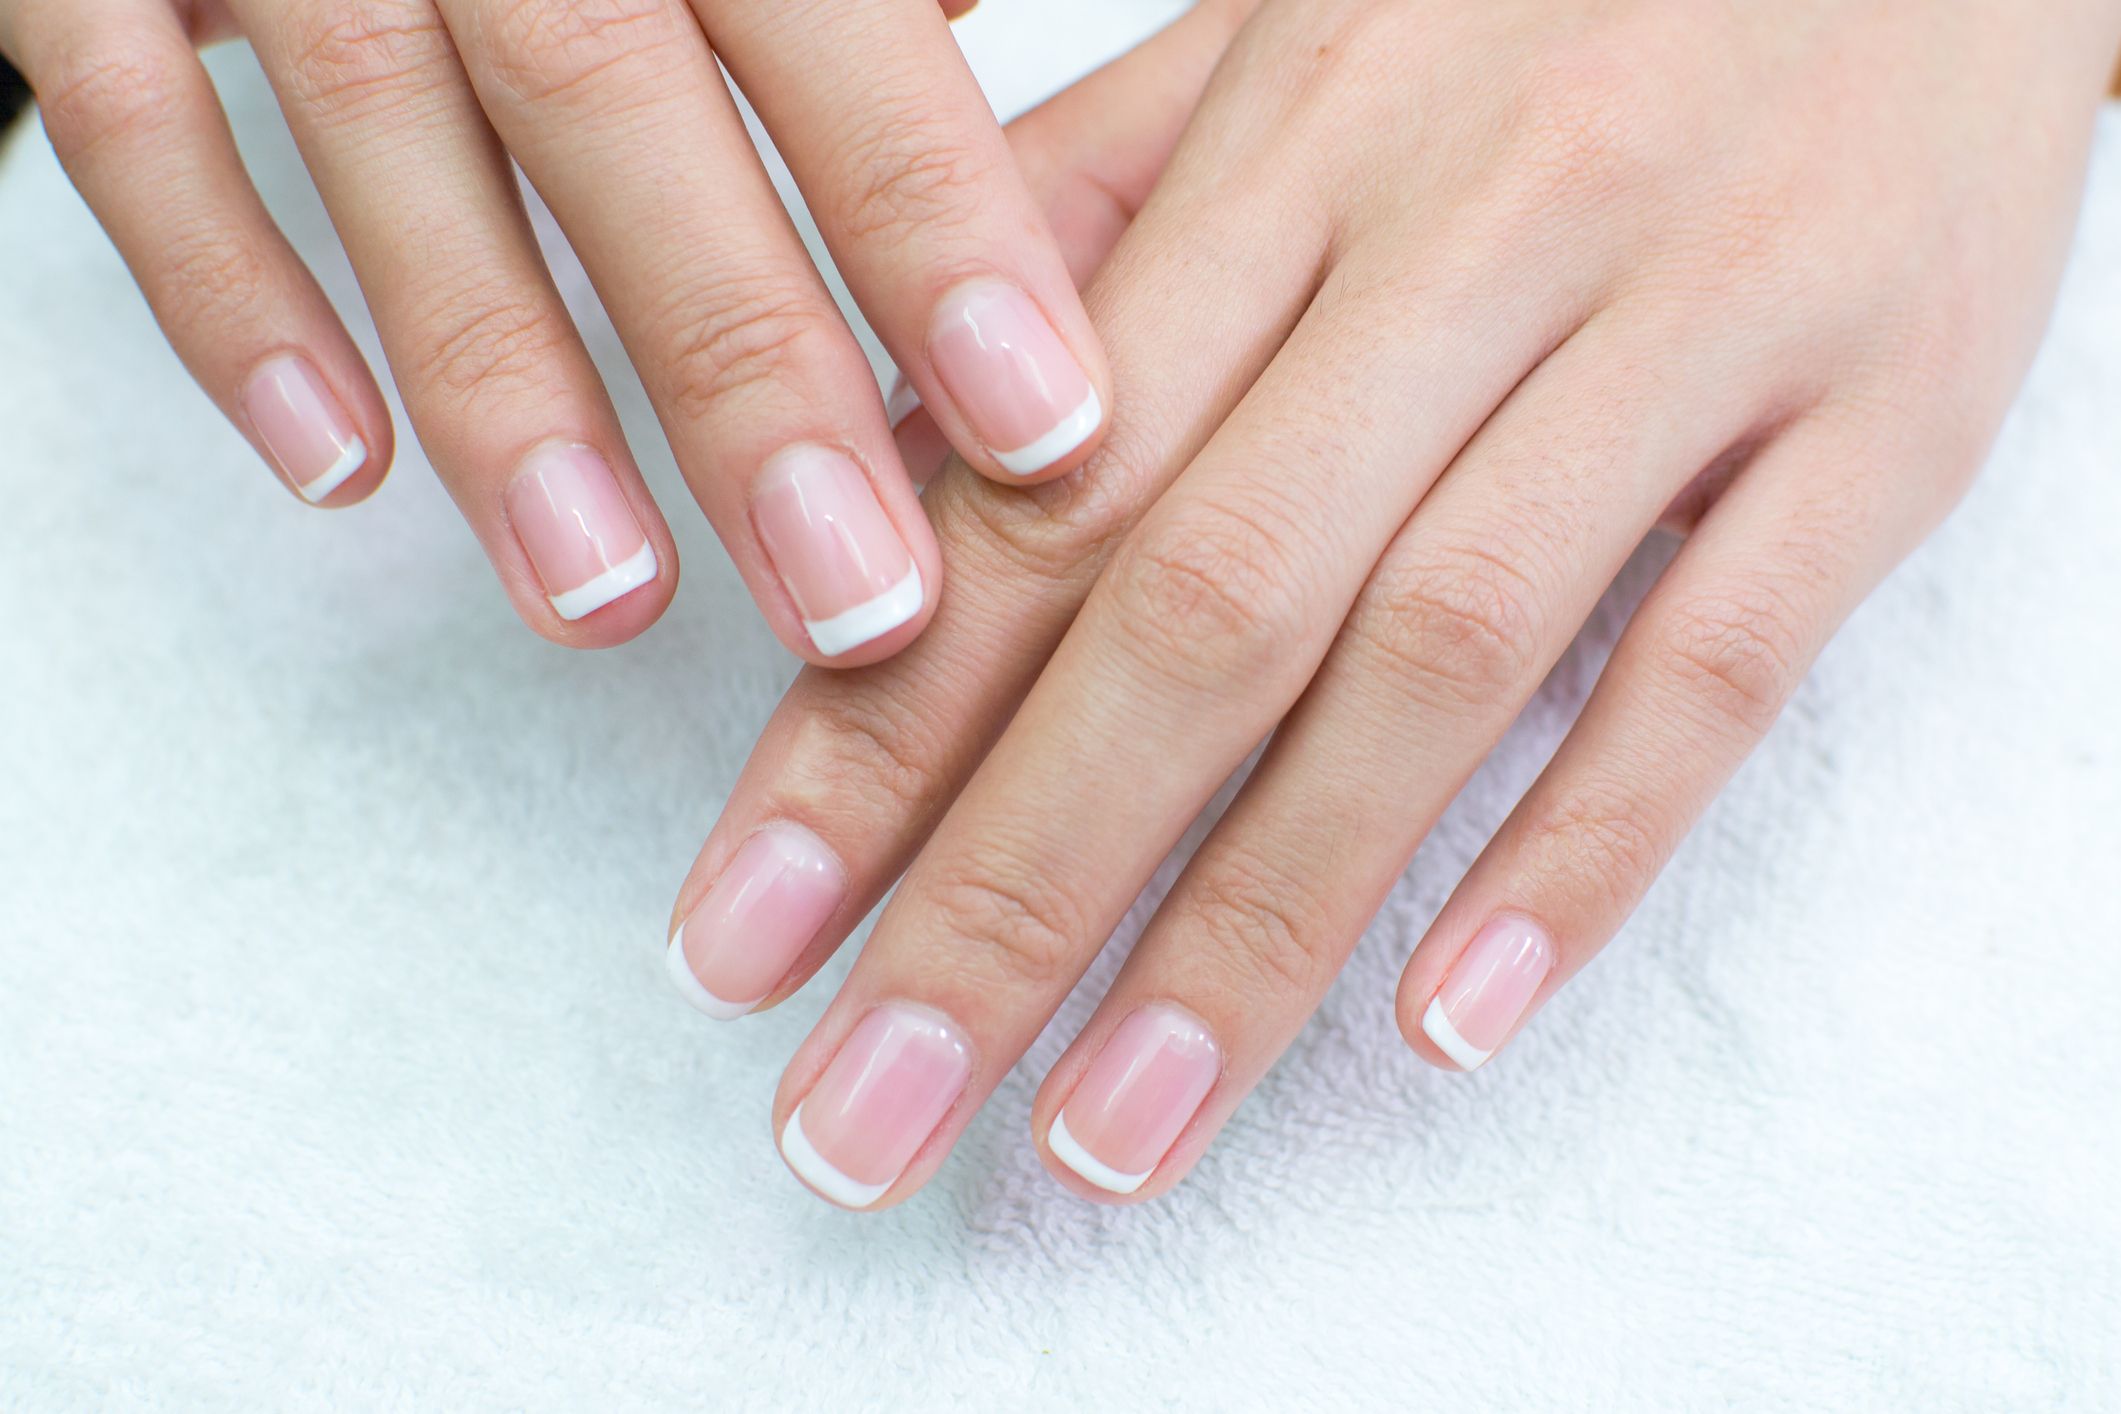 Signs of Vitamin Deficiency in Nails You Shouldn't Ignore